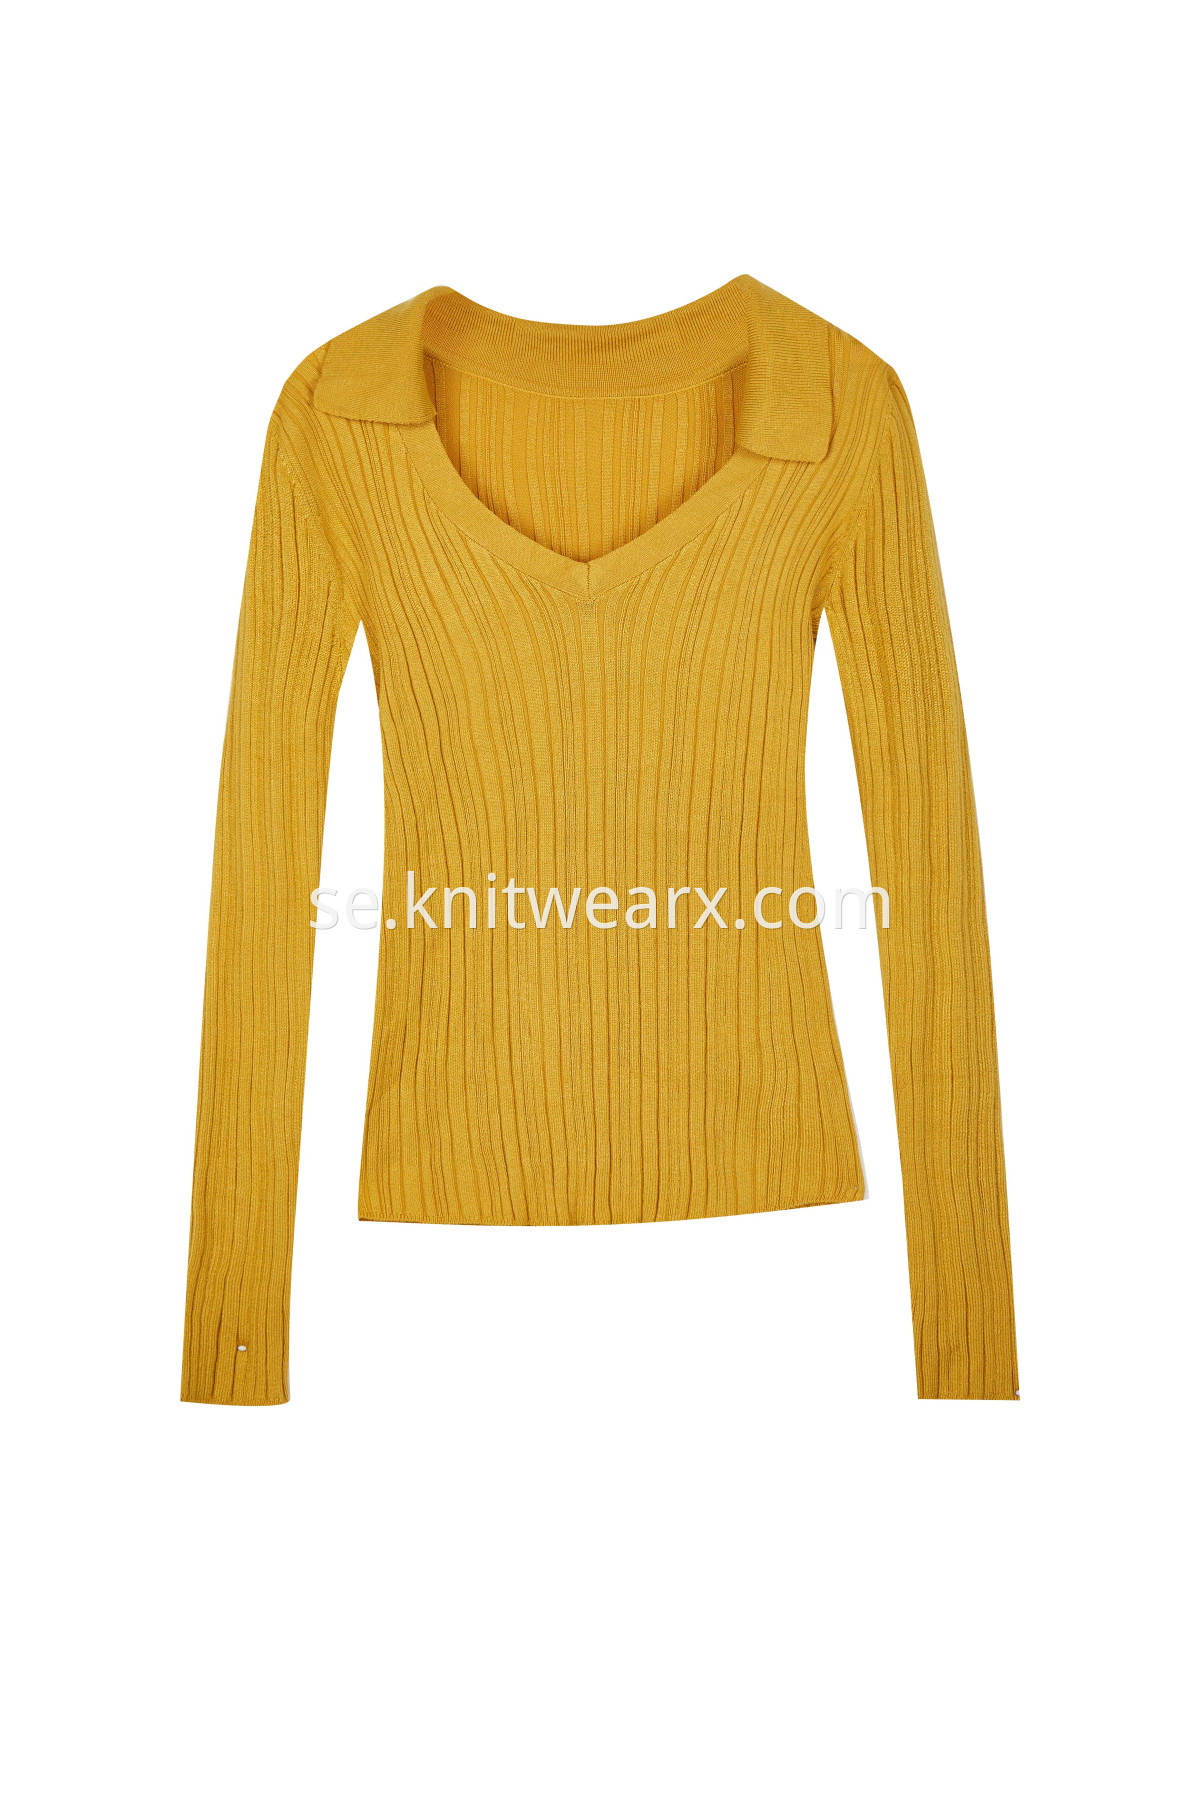 Women‘s Turn-Down Collar Soft Knitted Top Pullover